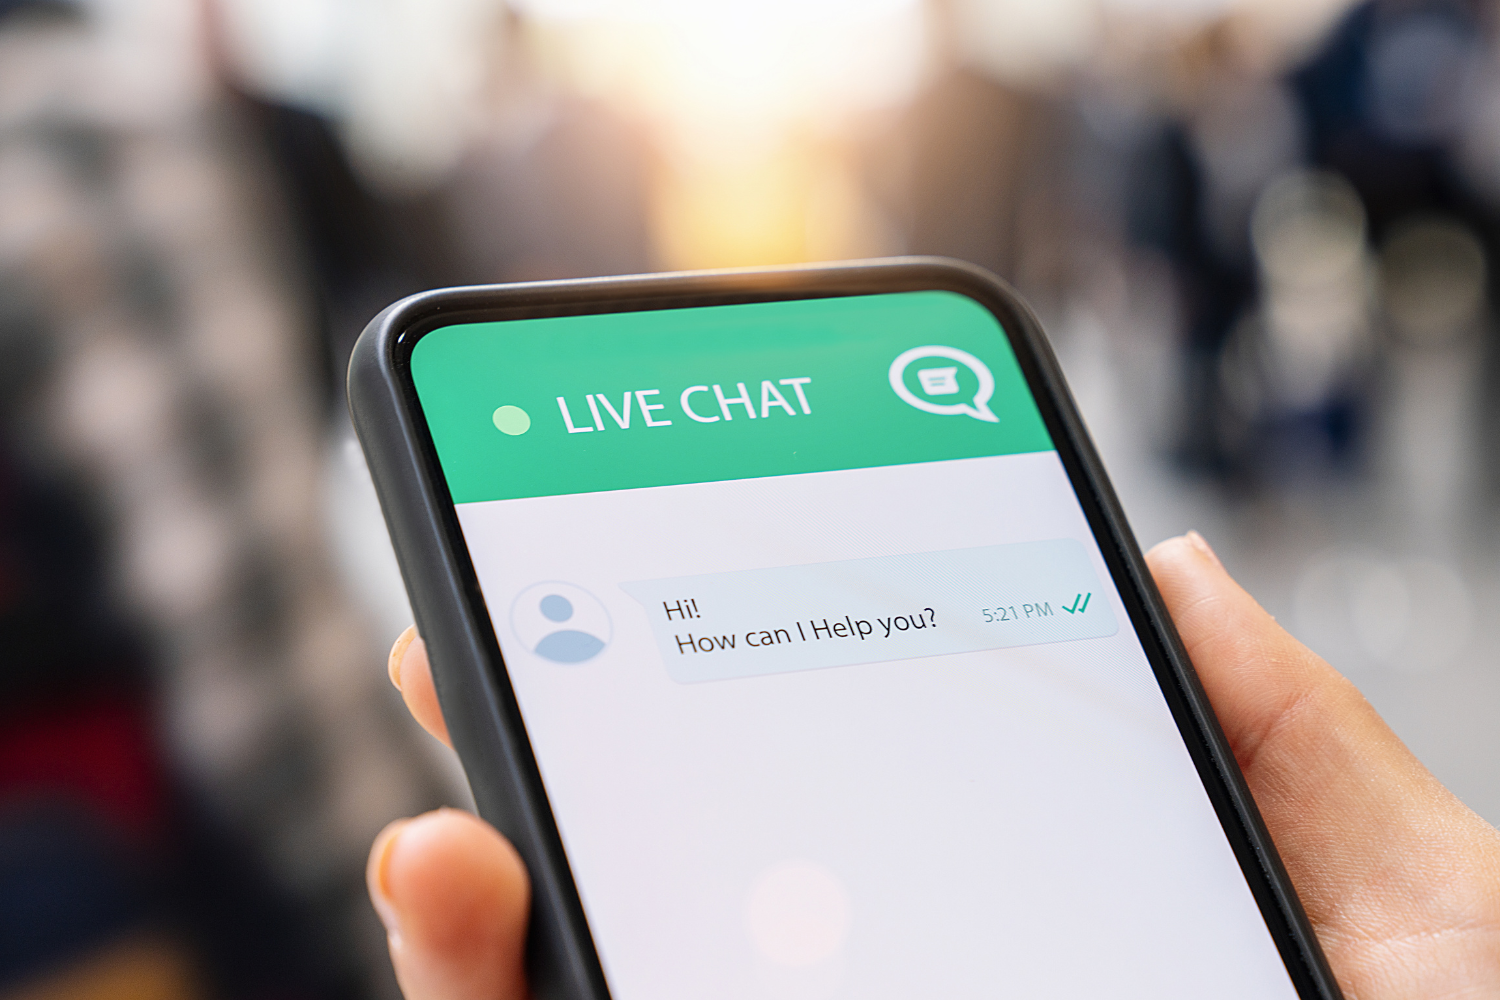 A persons hand holding a smartphone with "Live Chat" in a green banner across the screen. The chat says "Hello! How can I help you?"